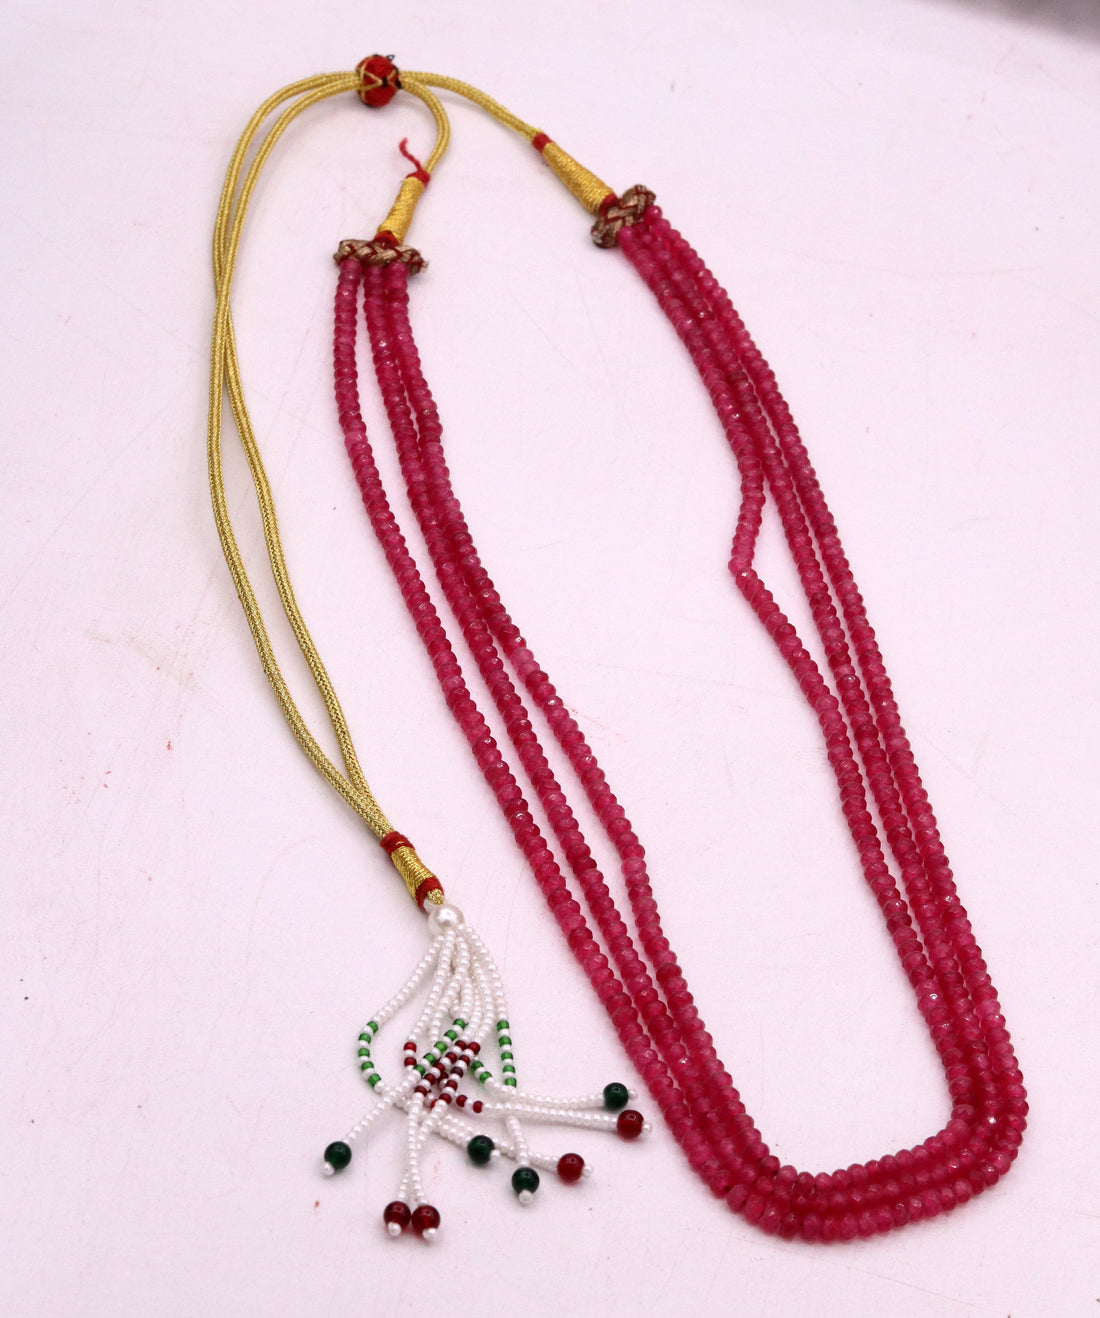 Vintage antique design handmade gorgeous rose pink Quartz 3 line necklace, excellent beaded charm necklace tribal jewelry from india qd03 - TRIBAL ORNAMENTS